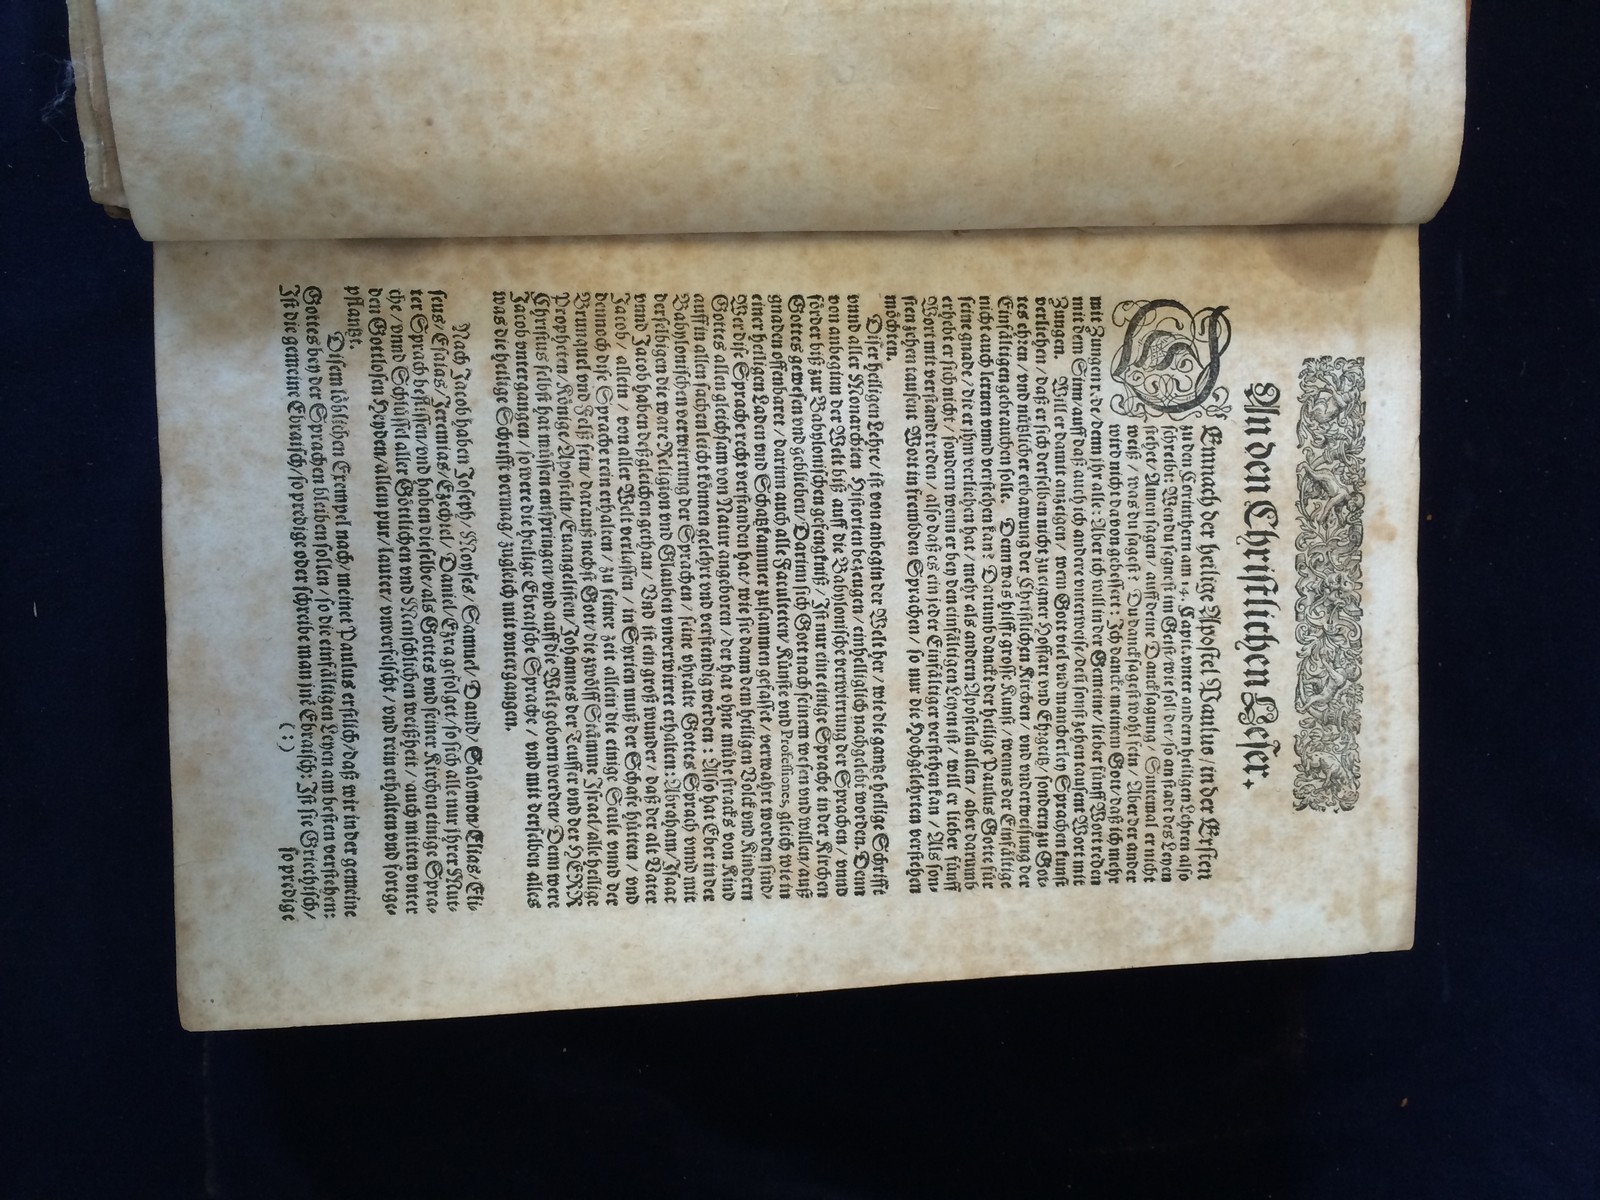 "The Elias Hutter Polyglot Bible" - both volumes, first edition printed 1599.  The New Testament - Image 6 of 6